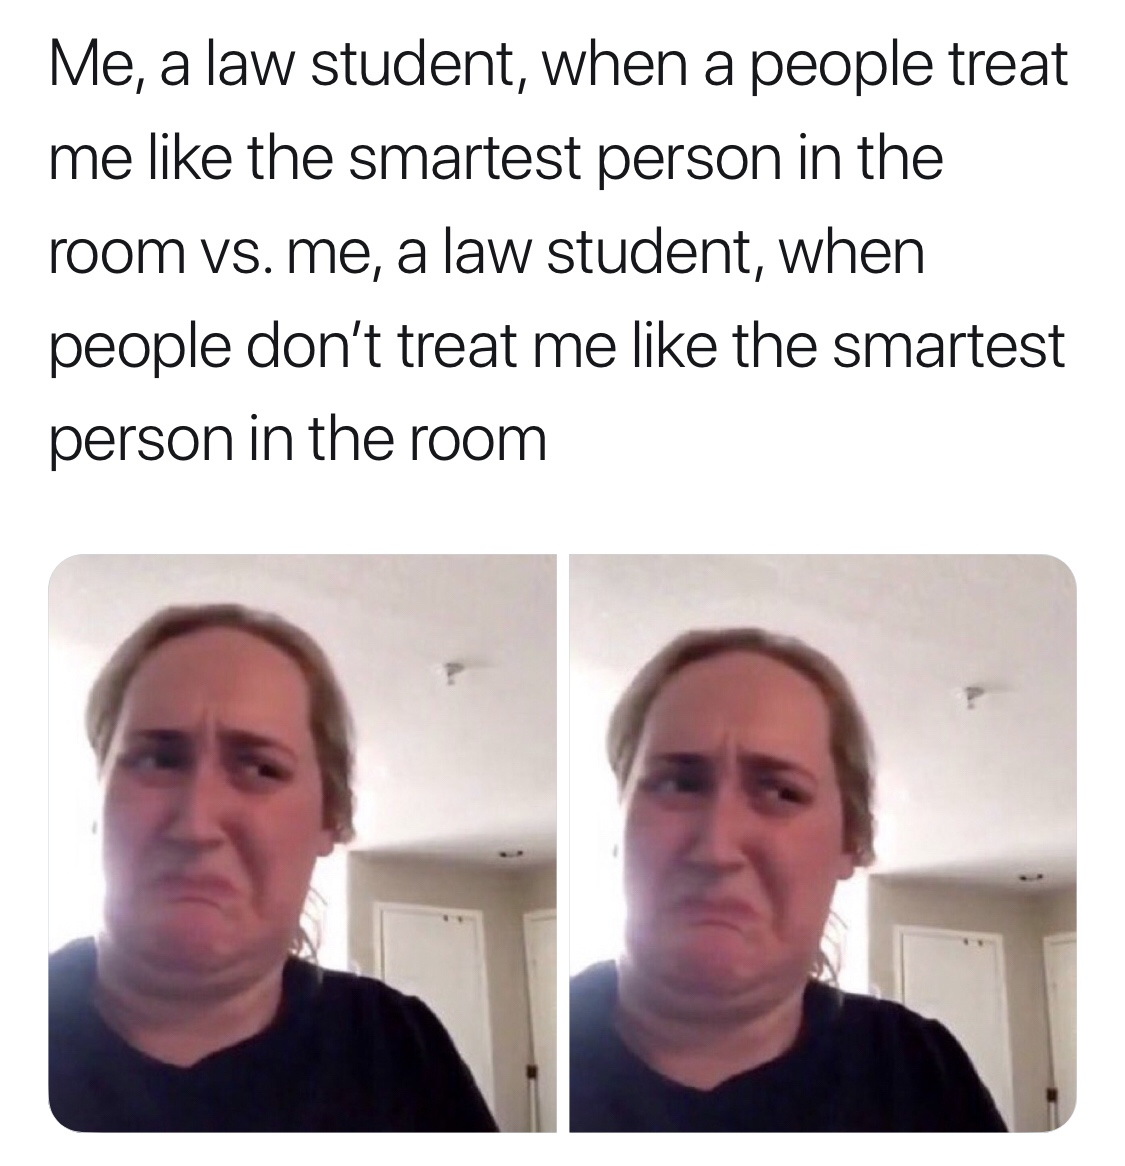 law meme - Tenya Iida - Me, a law student, when a people treat me the smartest person in the room vs. me, a law student, when people don't treat me the smartest person in the room